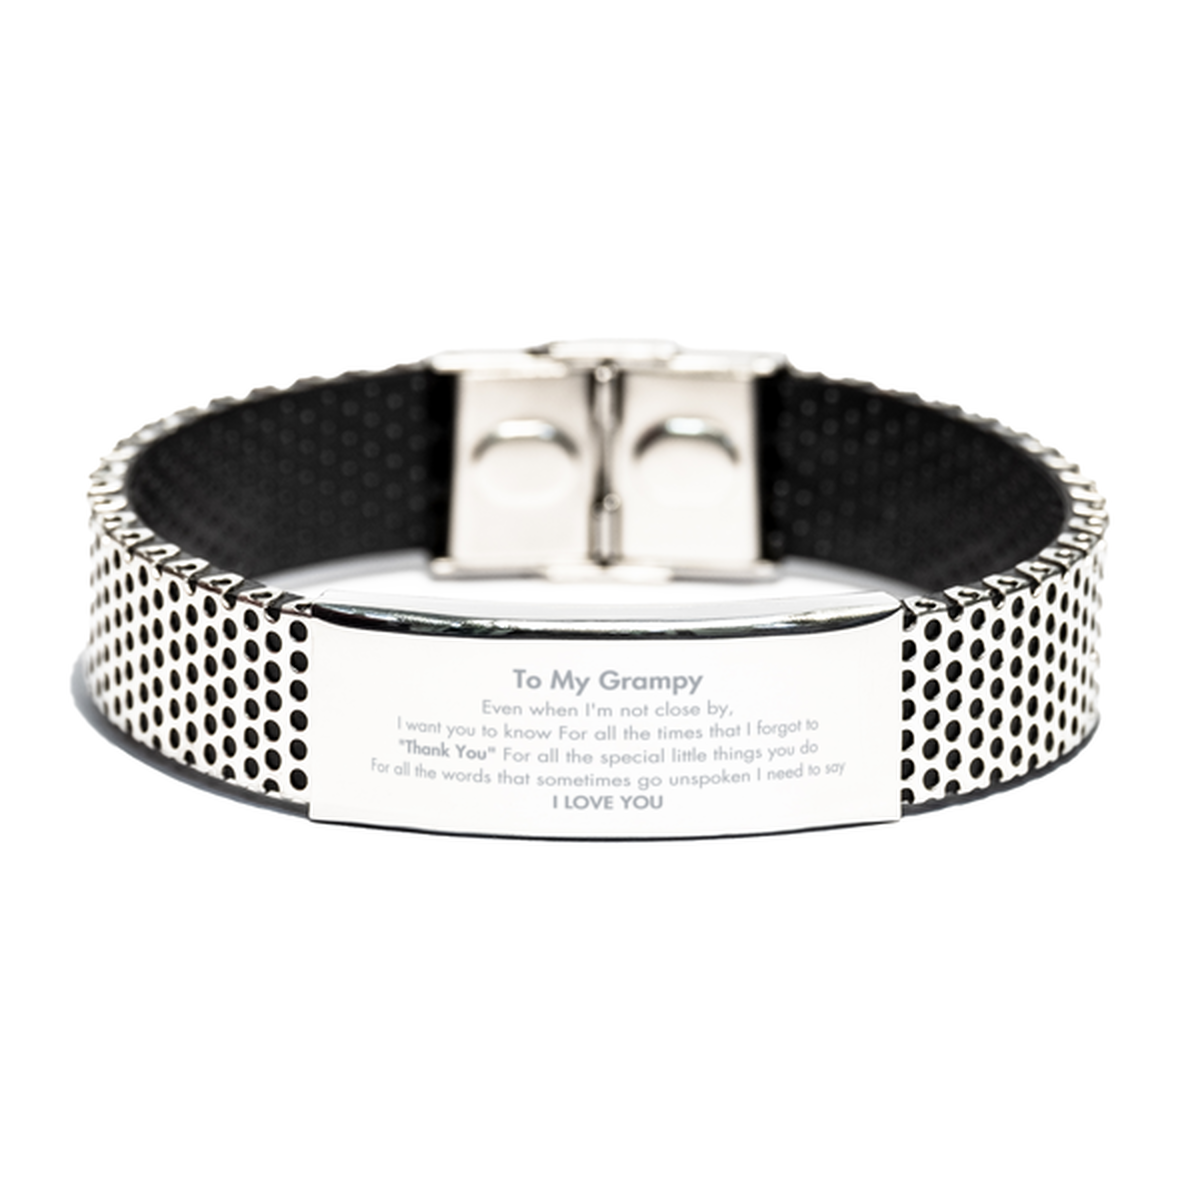 Thank You Gifts for Grampy, Keepsake Stainless Steel Bracelet Gifts for Grampy Birthday Mother's day Father's Day Grampy For all the words That sometimes go unspoken I need to say I LOVE YOU